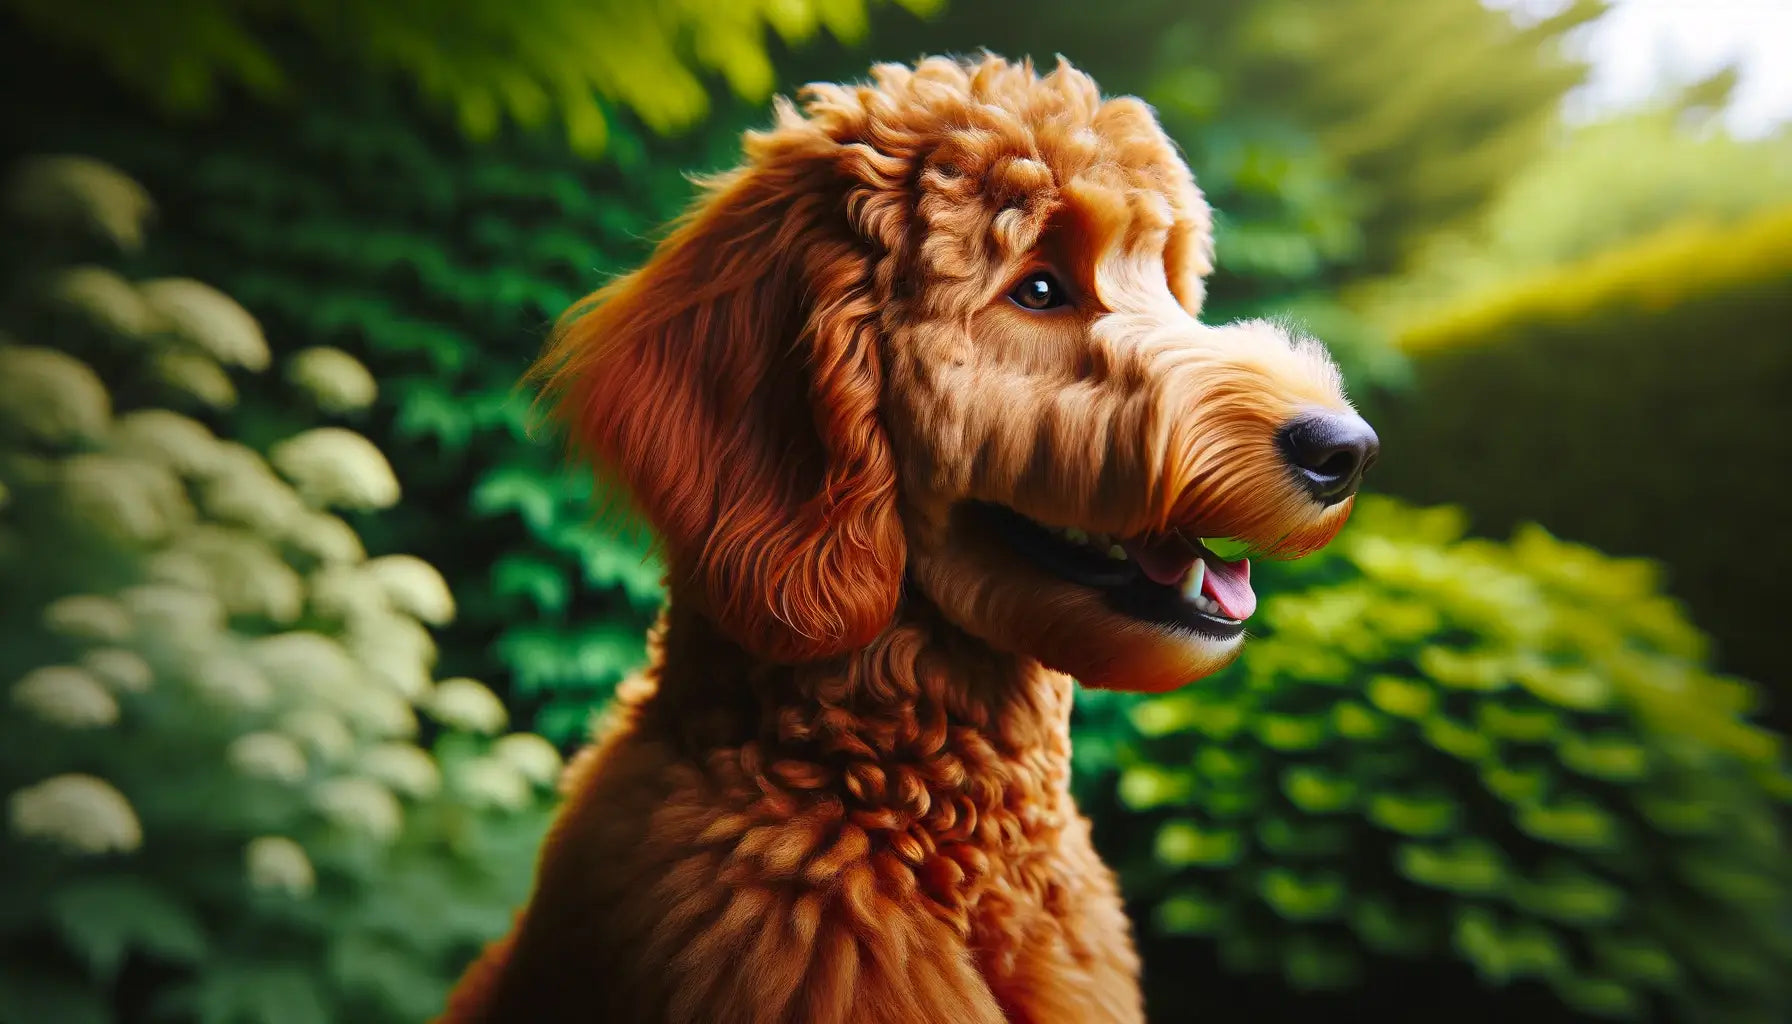 Red Goldendoodle against a backdrop of green foliage, emphasizing its unique red coat and friendly expression.